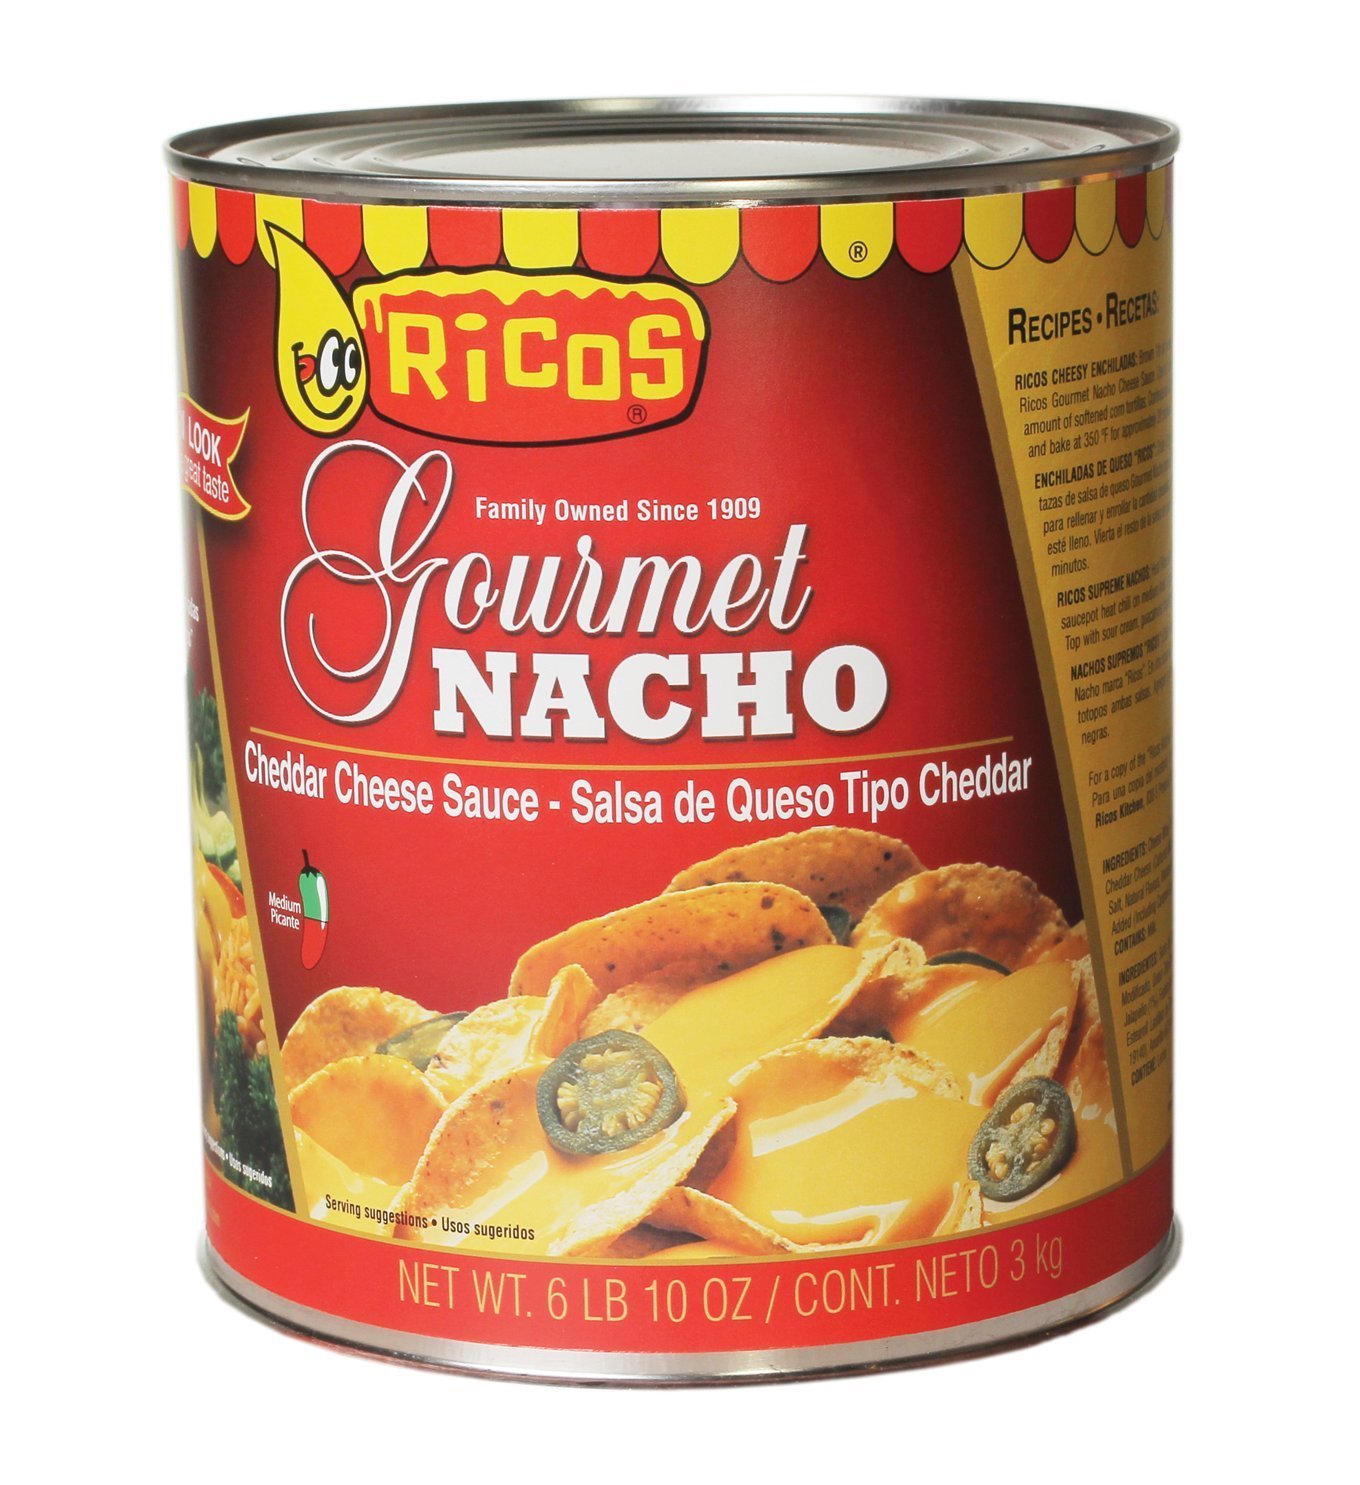 Zils M. recommendet the nacho cheese joke is What